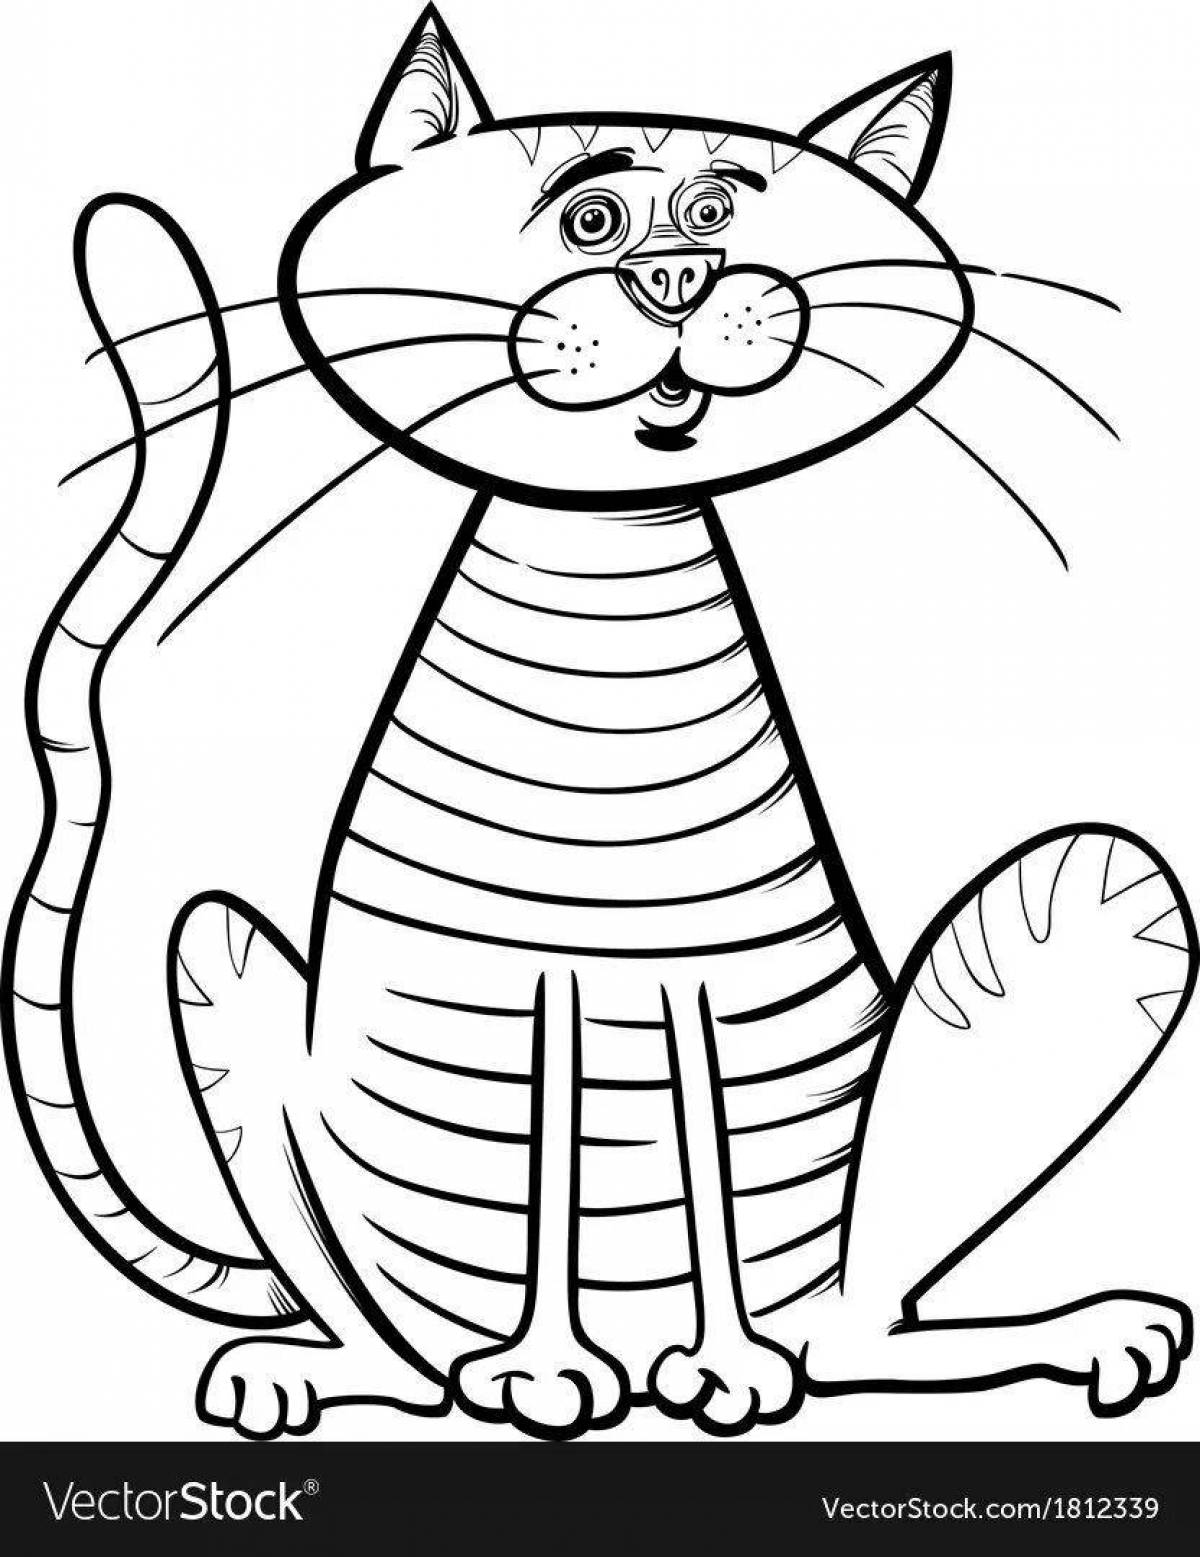 Coloring page funny tabby cat